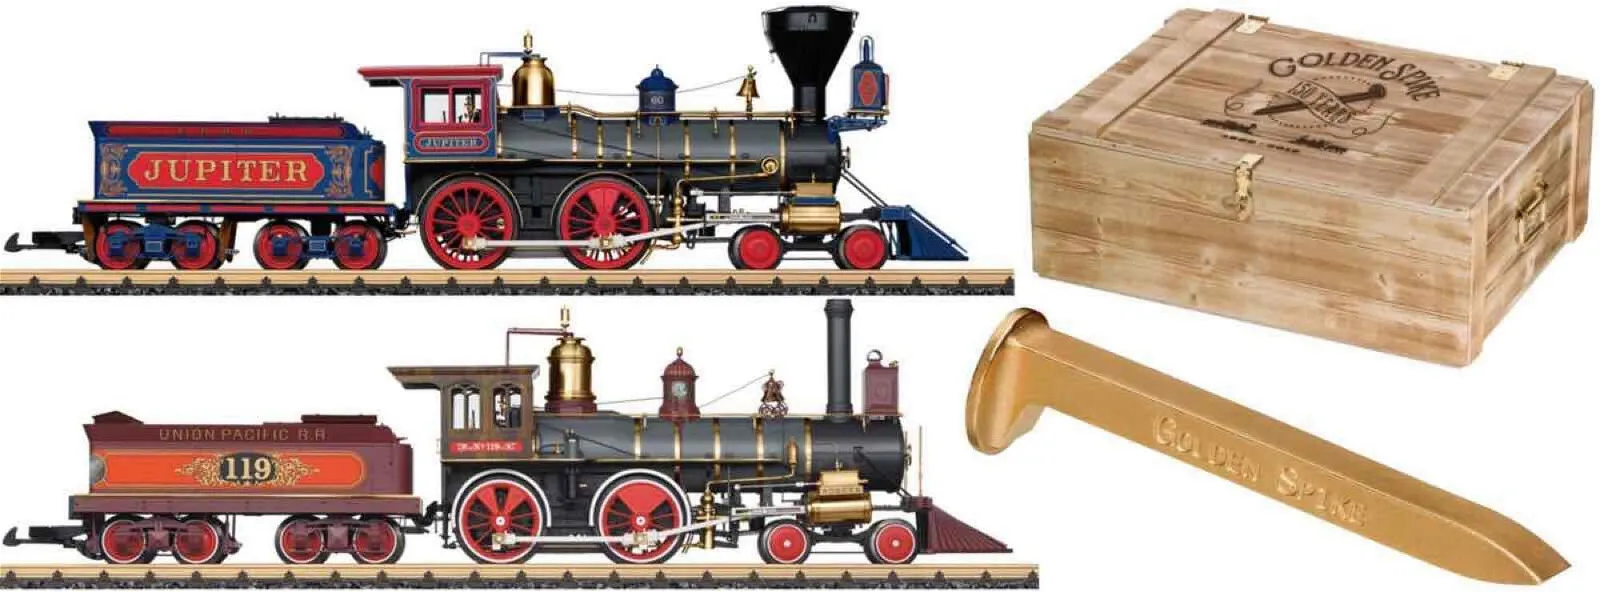 LGB special editions stoked toy train collectors&#8217; interest at Alderfer